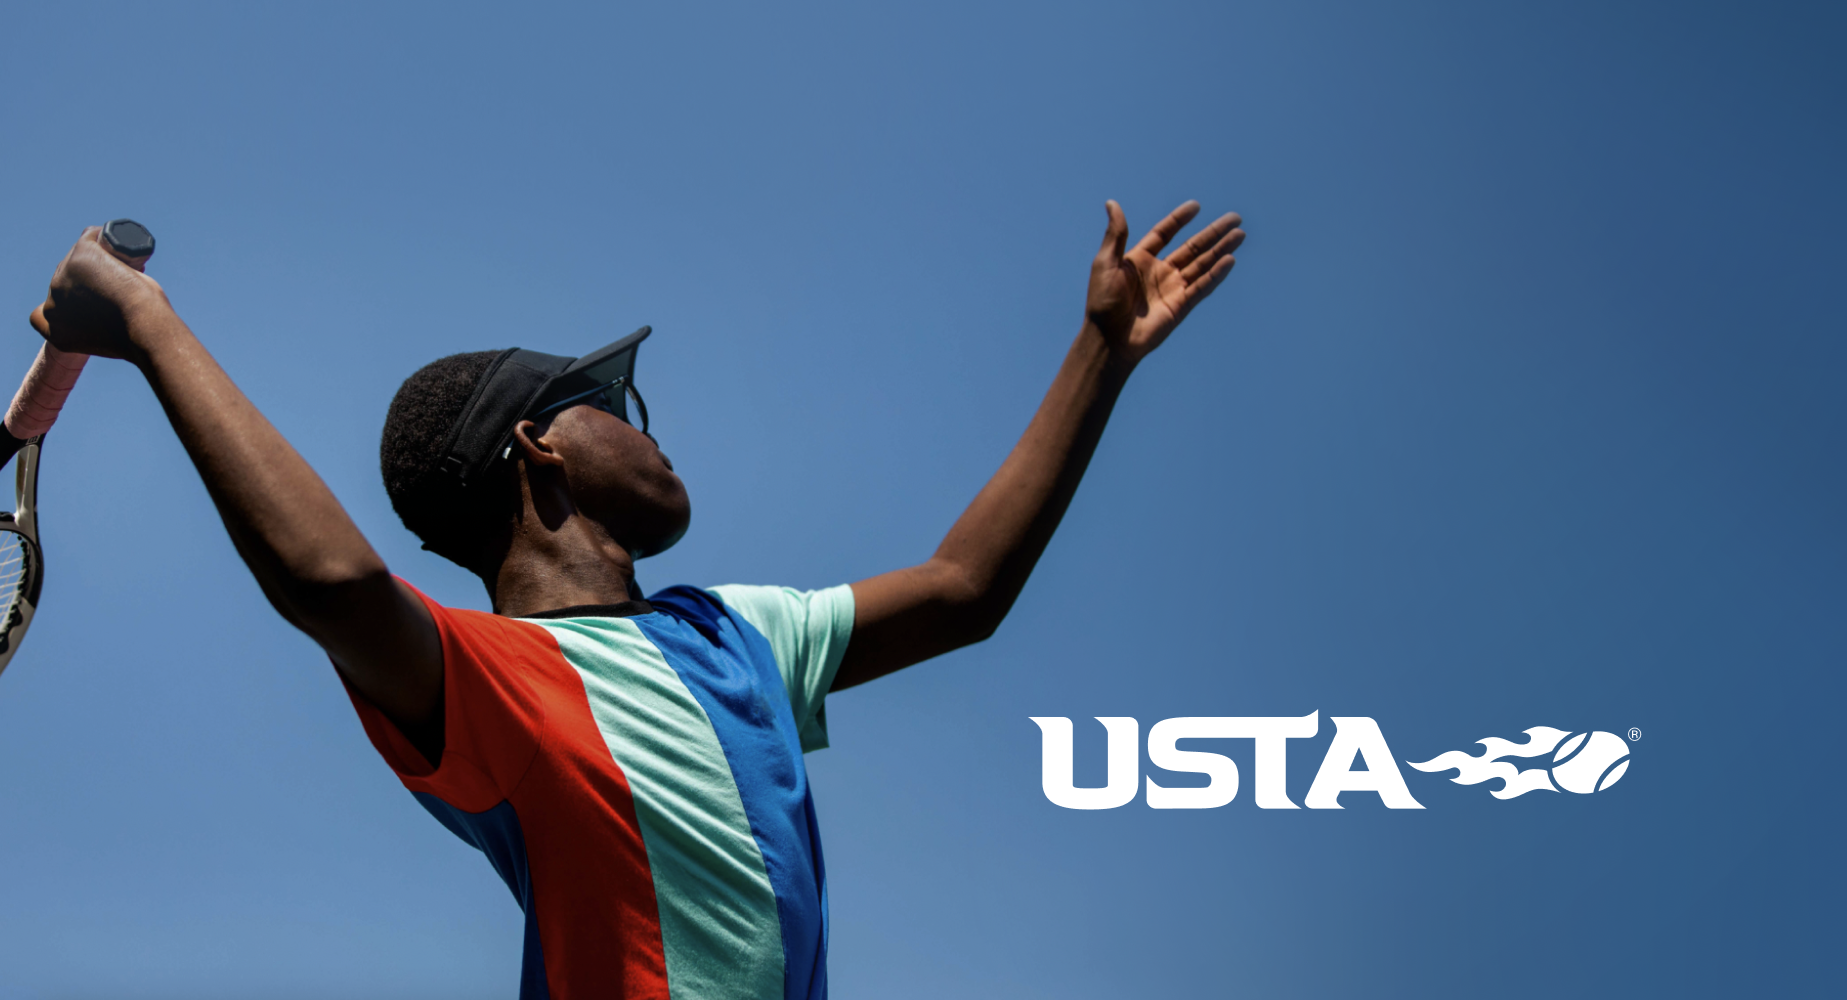 United States Tennis Association - Building belonging in the tennis community, on the court and behind the scenes.